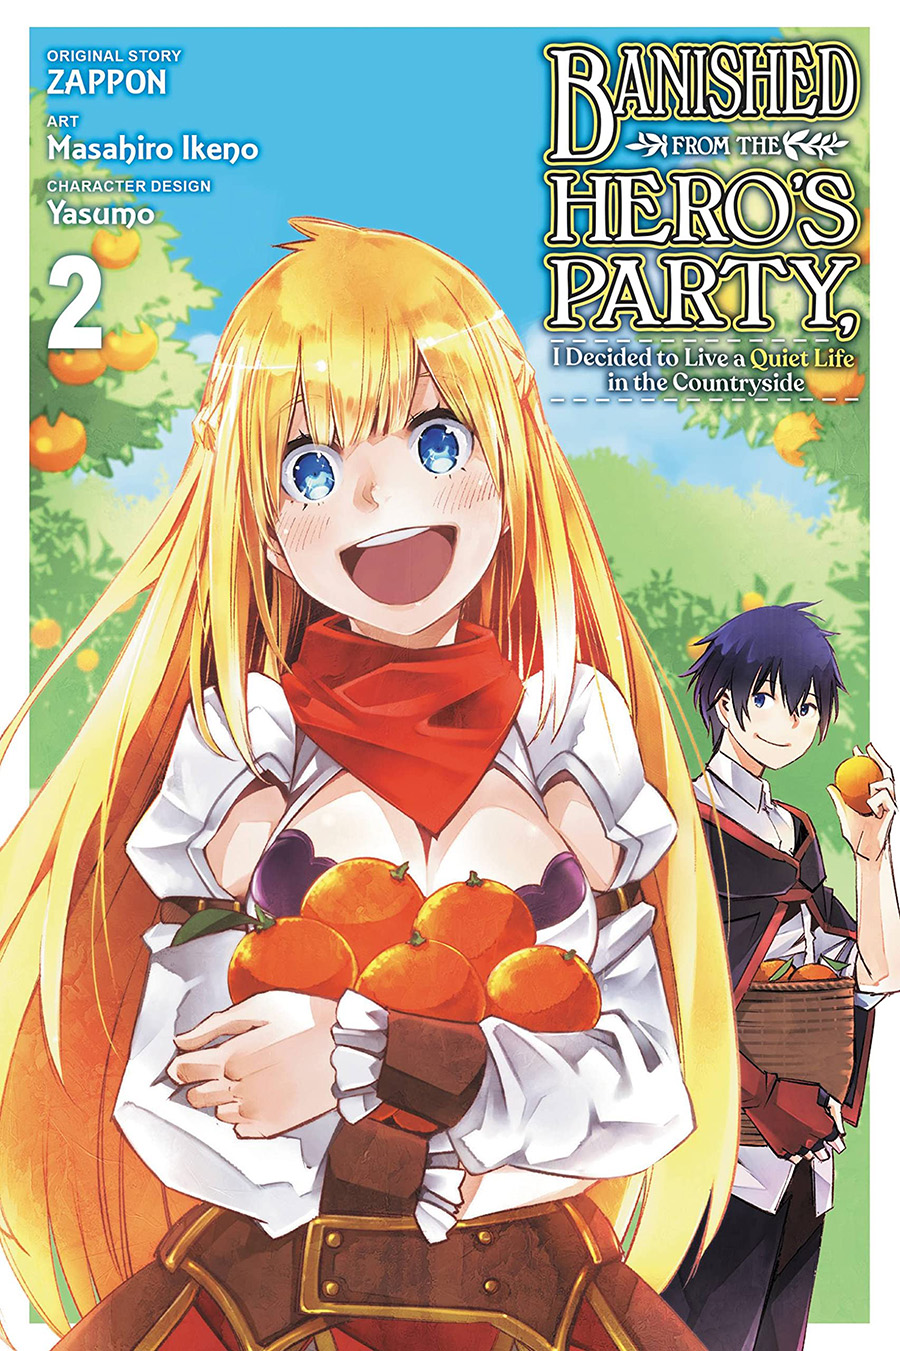 Banished From The Heros Party I Decided To Live A Quiet Life In The Countryside Vol 2 GN